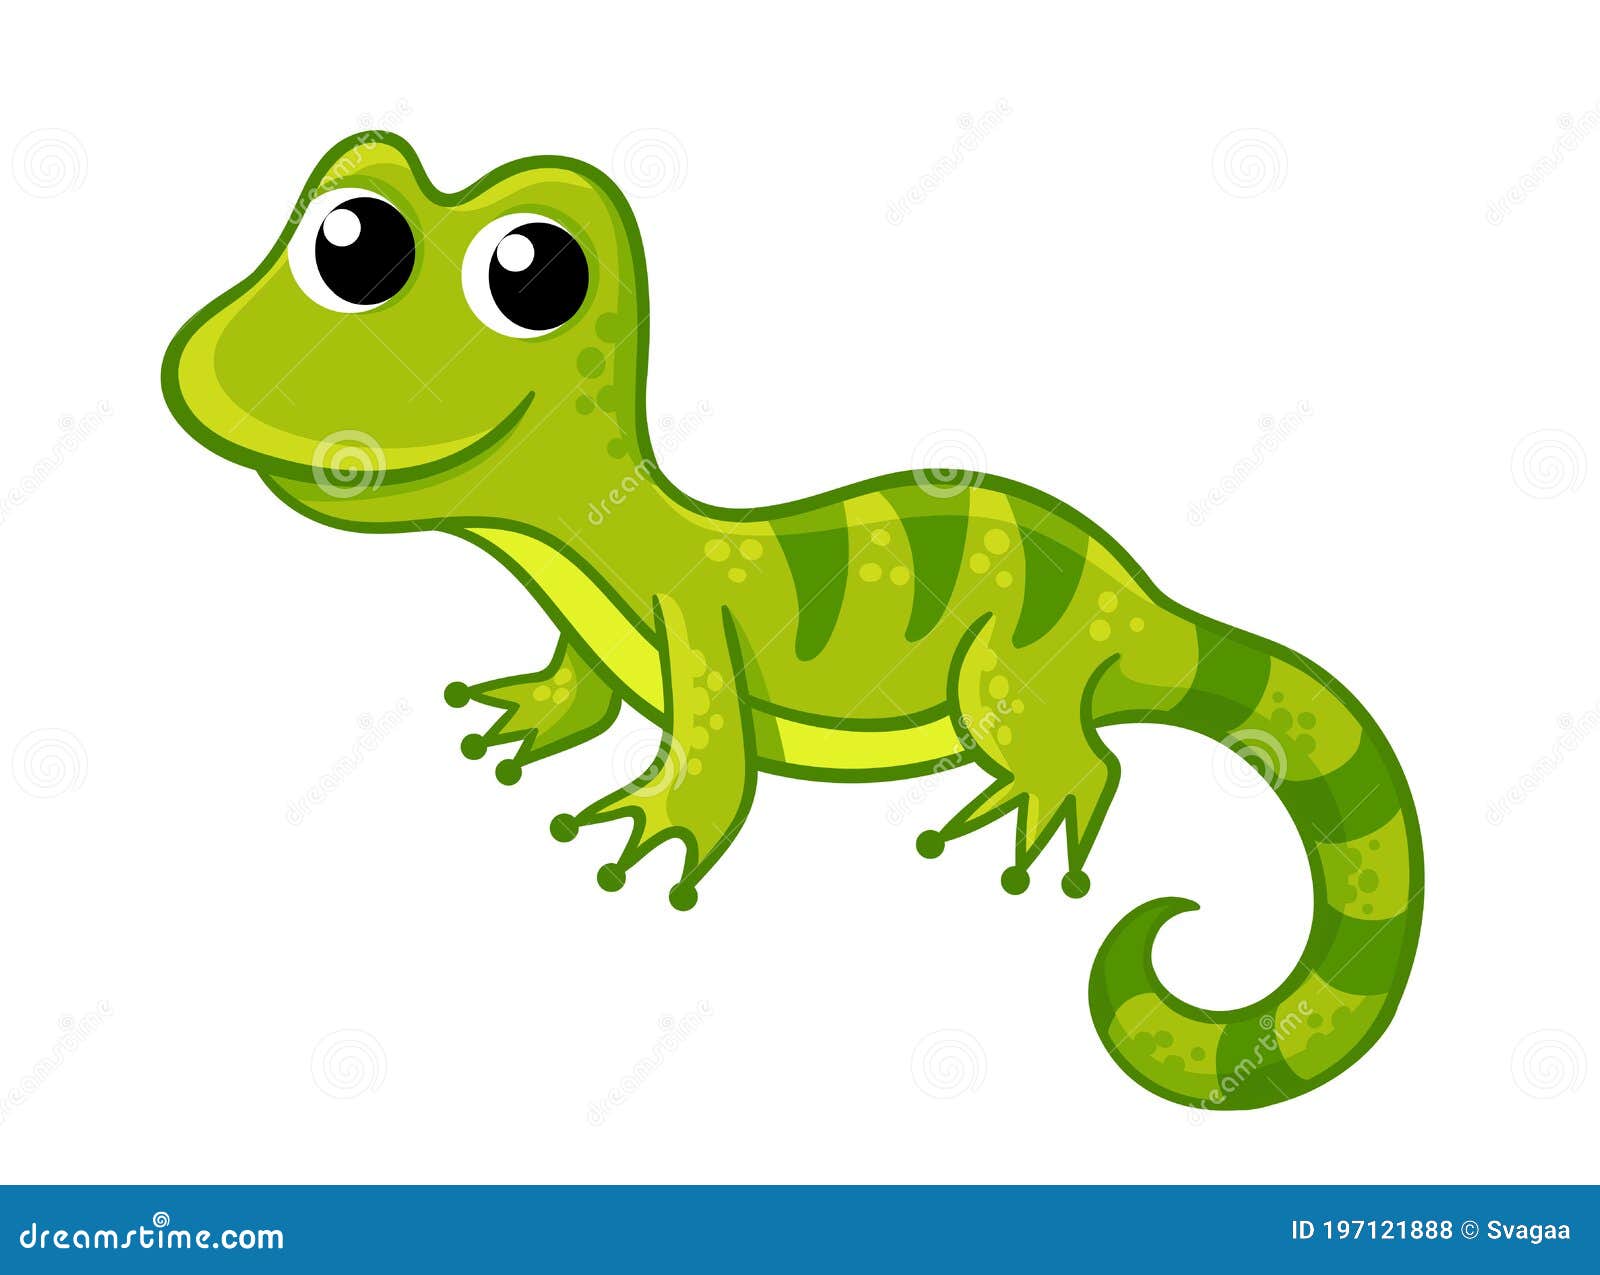 Little Funny Green Lizard in a Cartoon Style. Vector Illustration with Cute  Animals Stock Illustration - Illustration of caricature, reptilian:  197121888